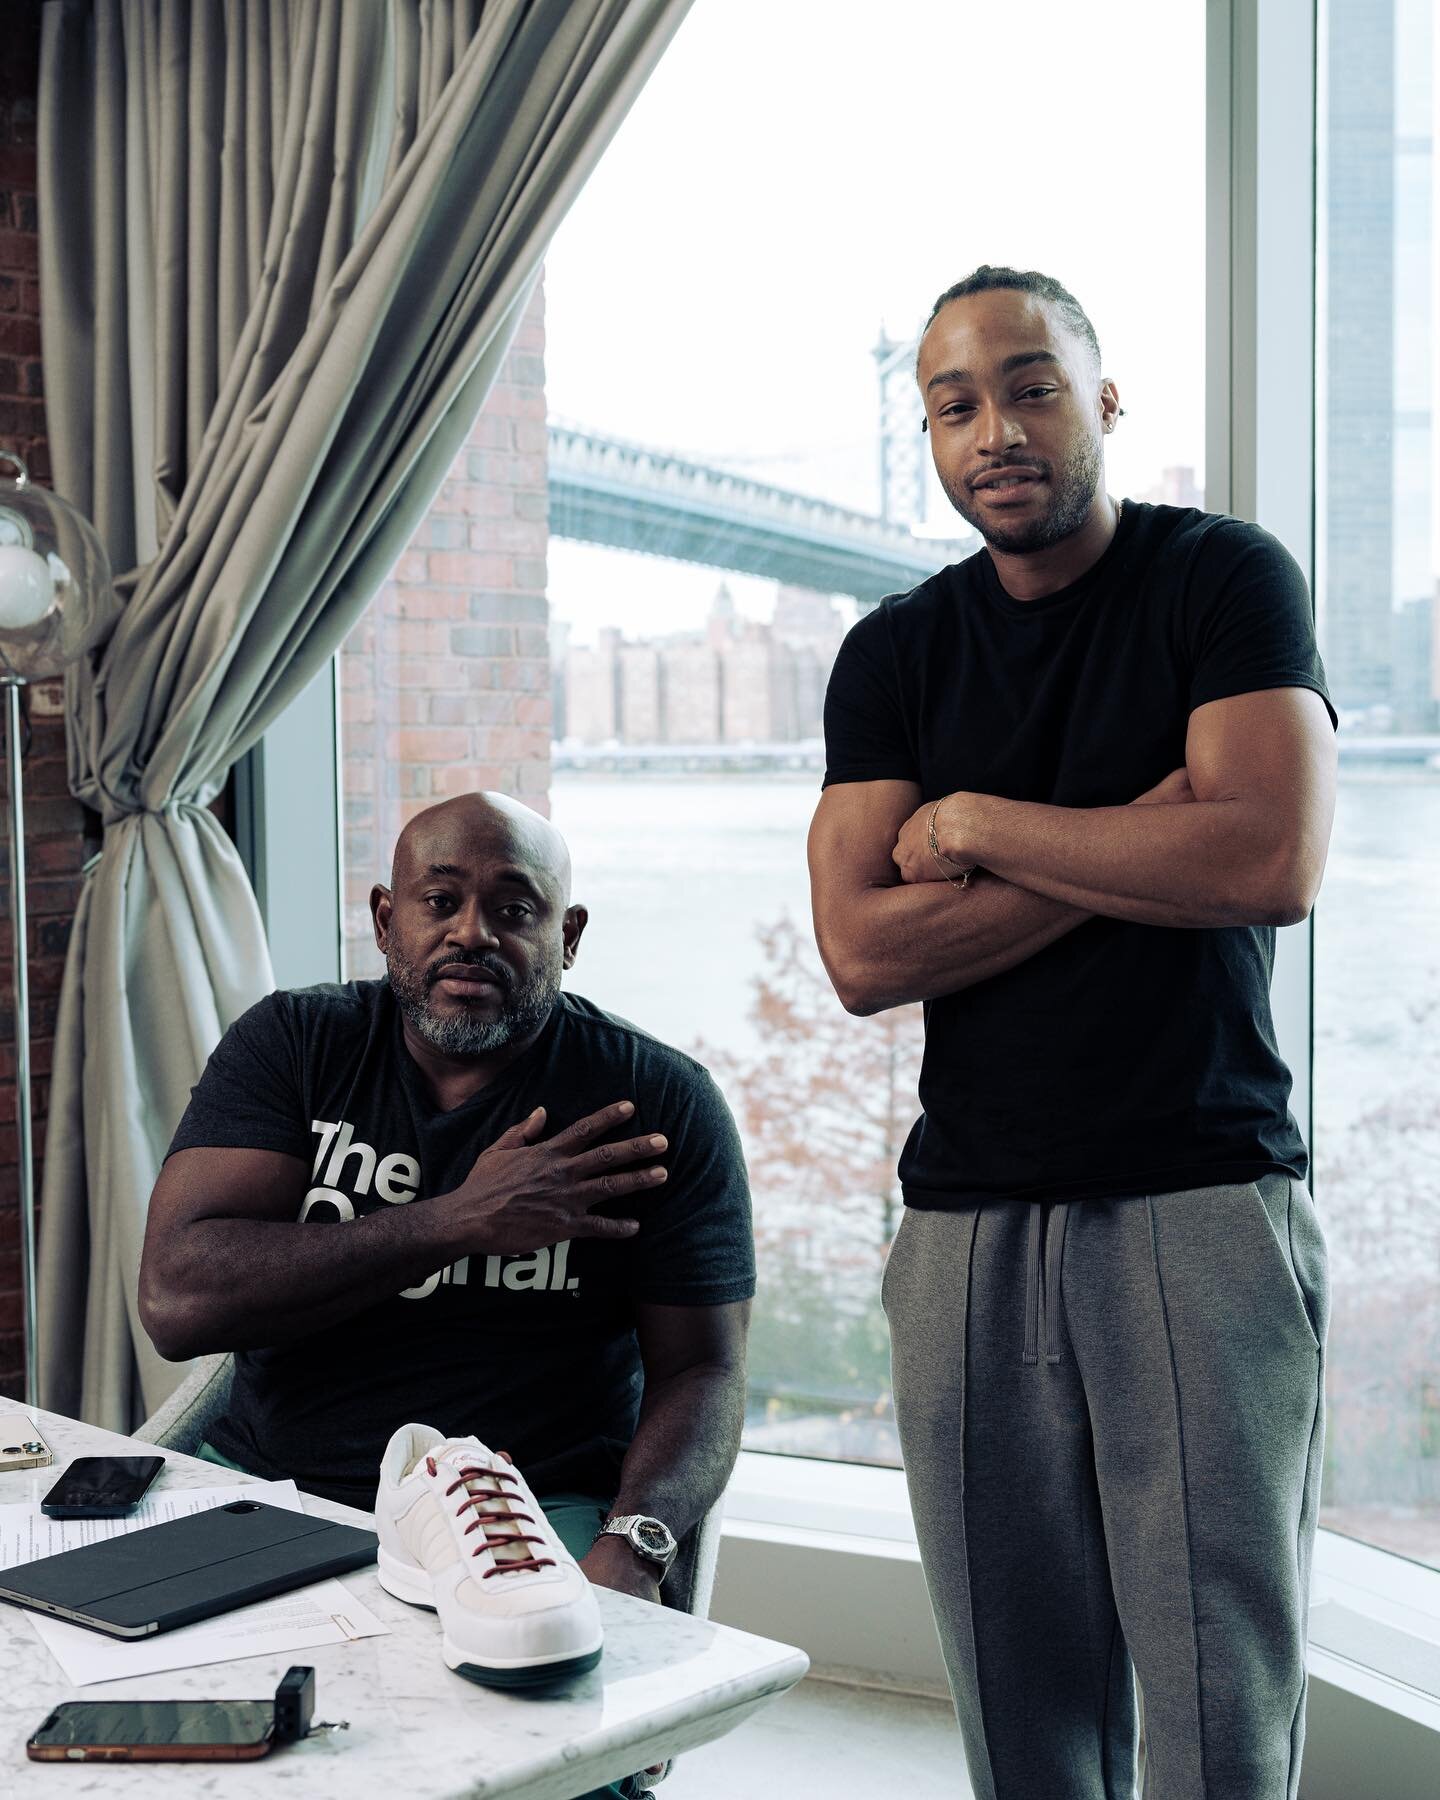 Nice with my hands &lsquo;cause I&rsquo;m hype with the hammers&hellip; ✍🏾✒️ @forbes | @reveriepage 📸 @goodhabit 

https://www.forbes.com/sites/cassellferere/2024/02/12/how-steve-stoute-fostered-hip-hop-sneaker-collaboration-with-the-reebok-scarter